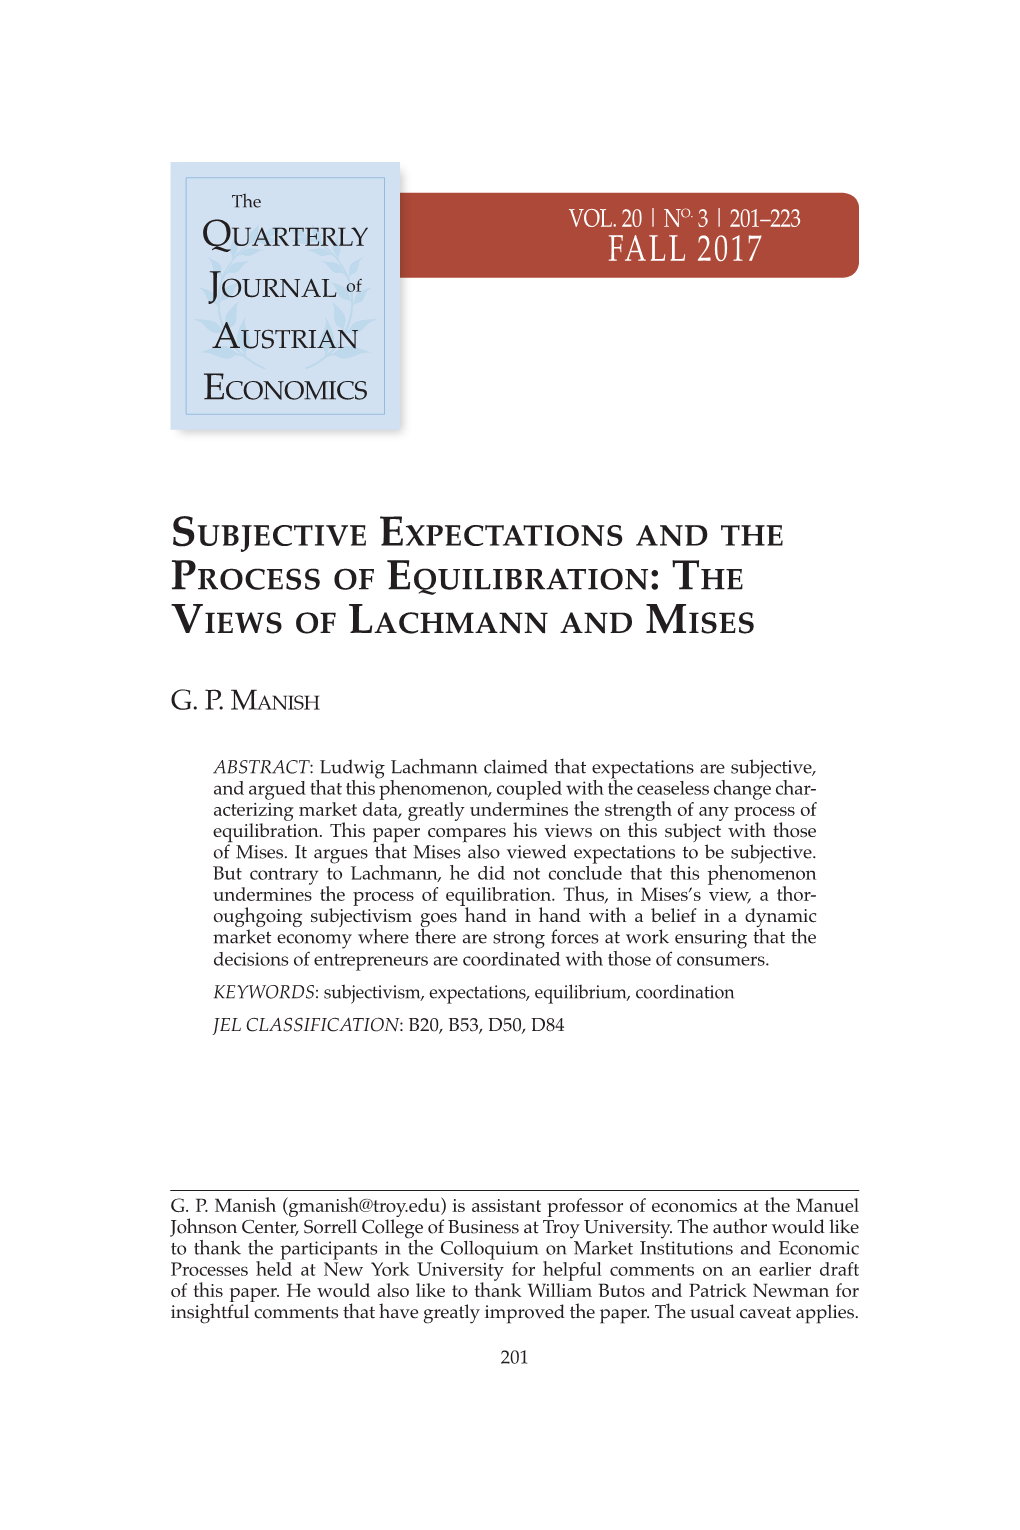 Subjective Expectations and the Process of Equilibration the Views